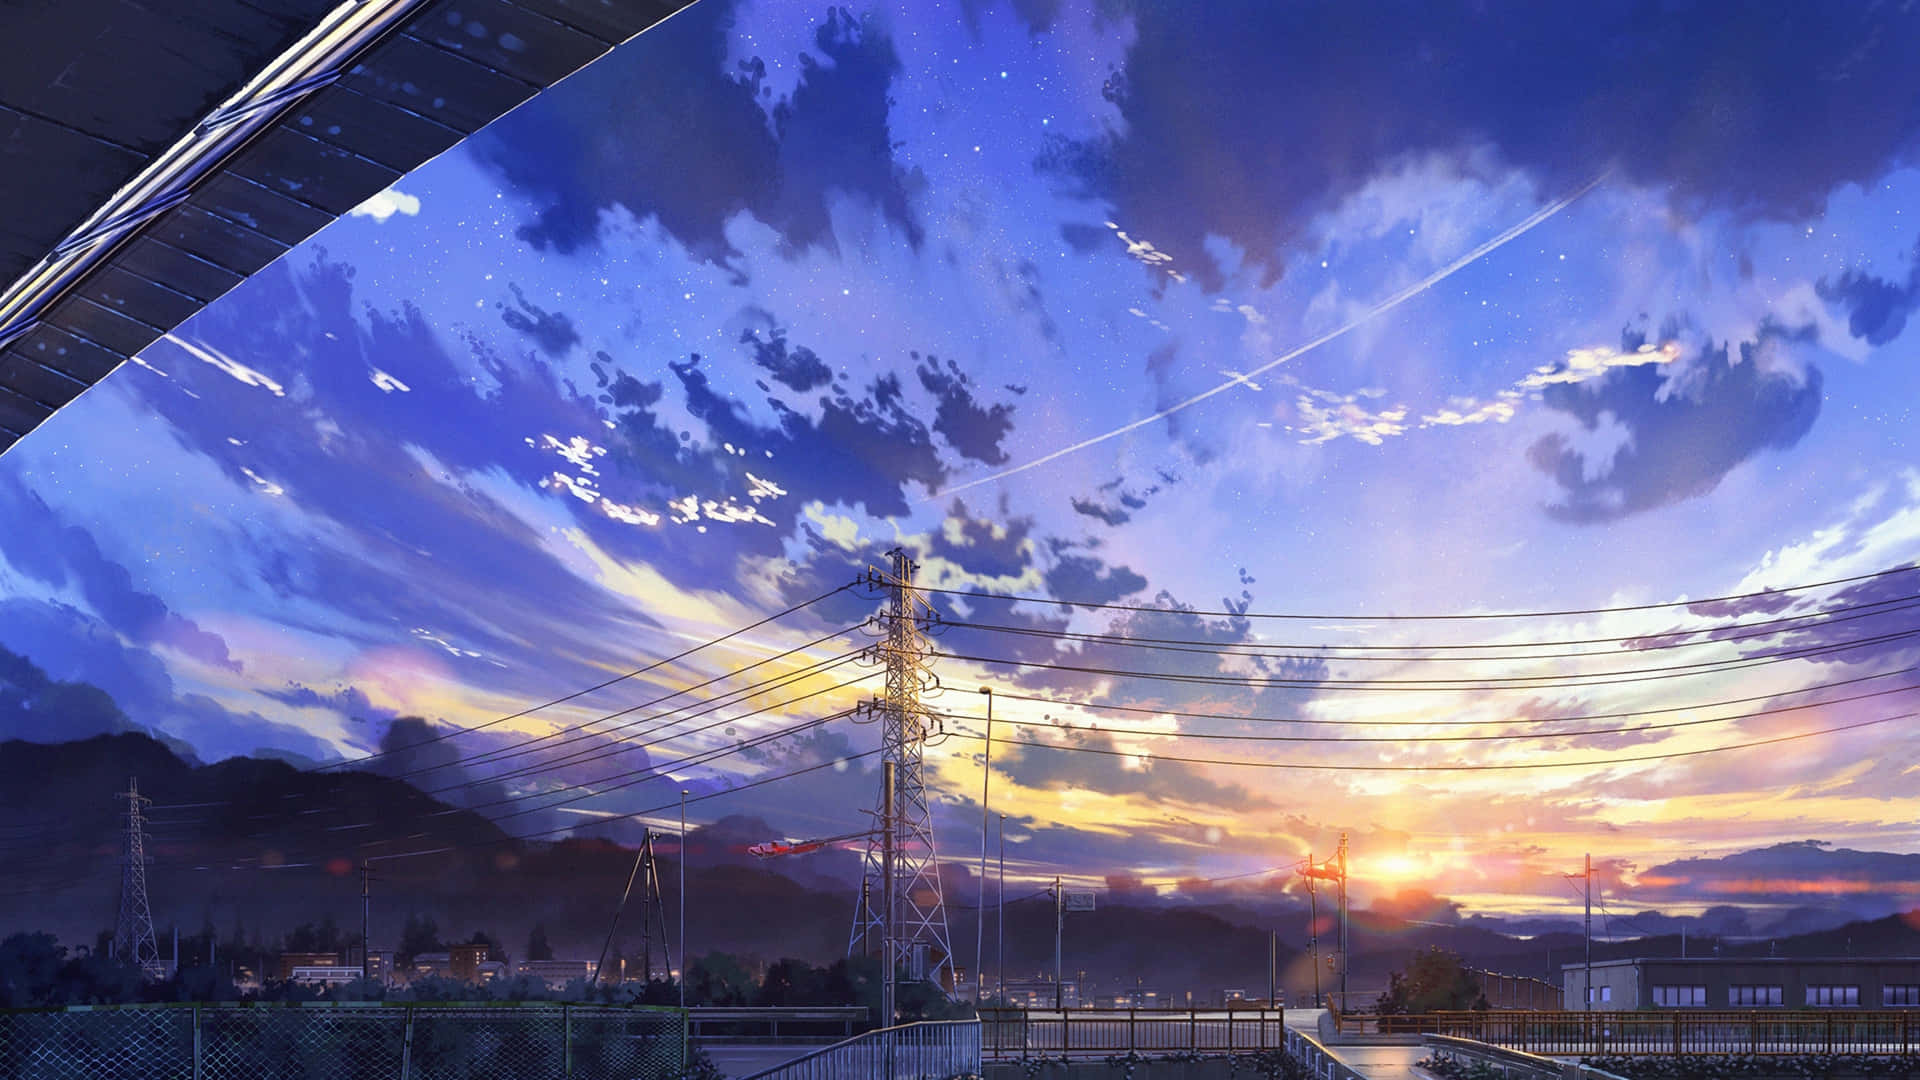 Enjoy a mesmerizing anime experience with 4K visuals